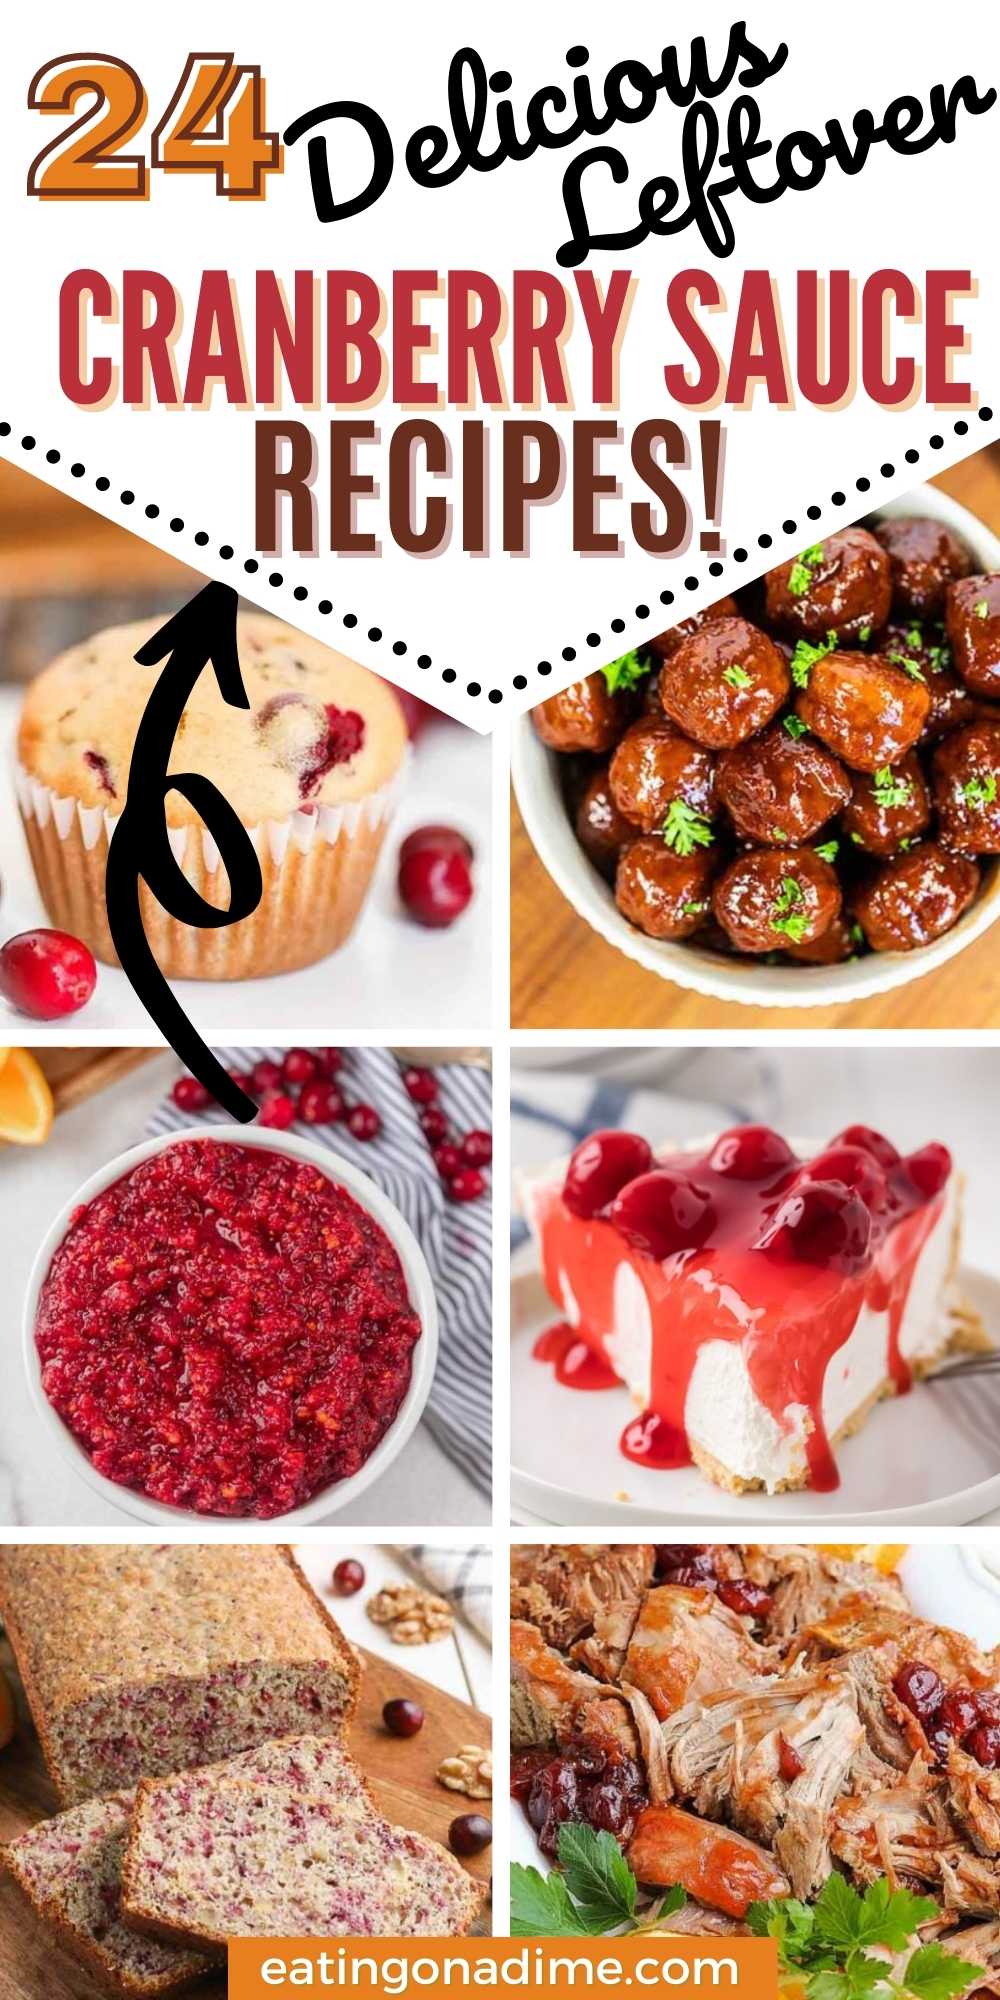 Try 24 leftover cranberry recipes to turn cranberry sauce into something new. From muffins to pork chops and more, these recipes are tasty. #eatingonadime #cranberrysauceleftovers #holidayrecipes